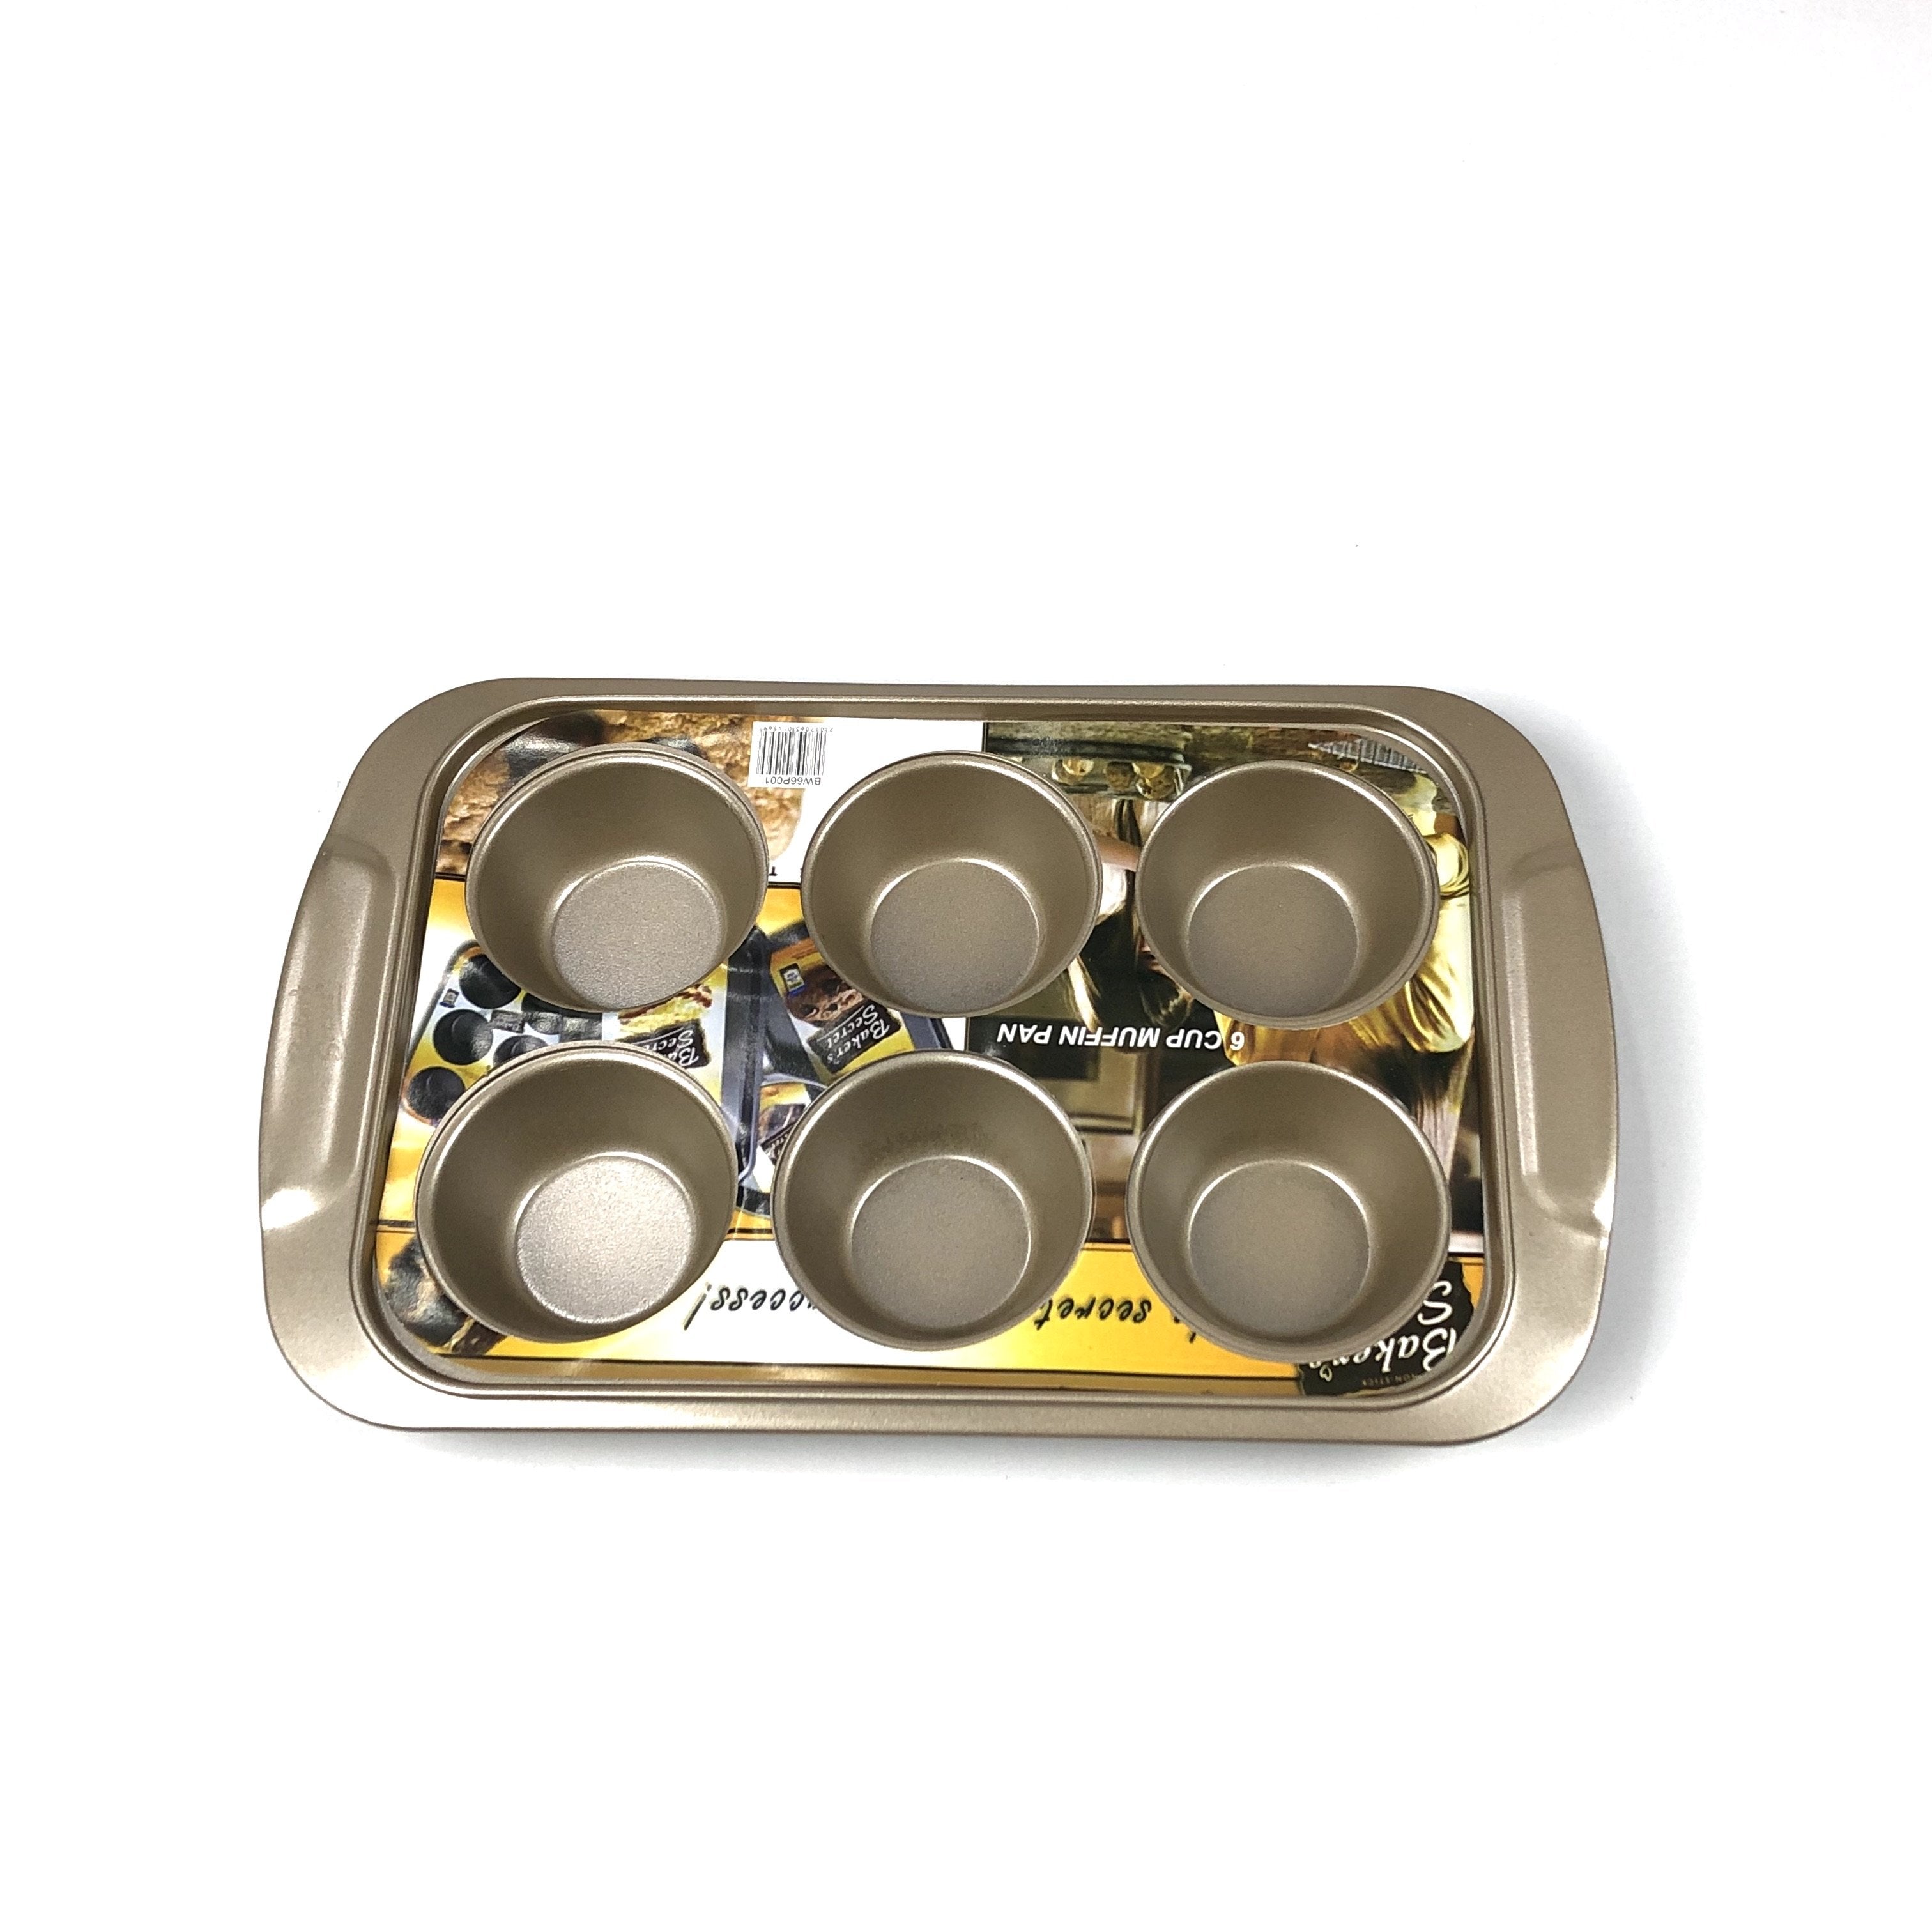 Baker's Secret Nonstick 12cup Muffin Pan - Advanced Collection